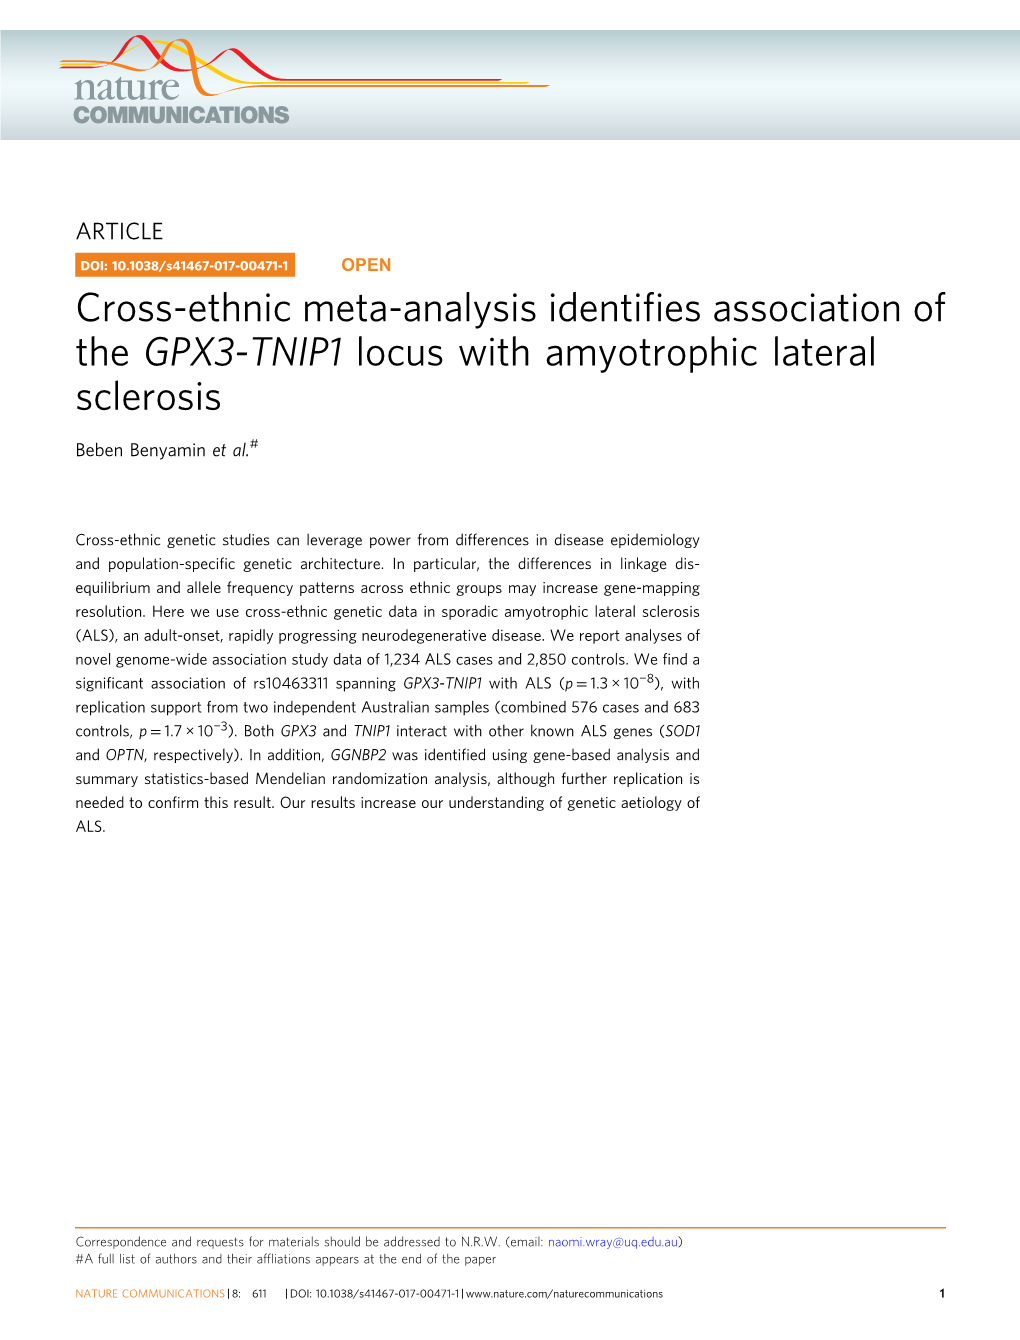 Cross-Ethnic Meta-Analysis Identifies Association of the GPX3-TNIP1 Locus with Amyotrophic Lateral Sclerosis